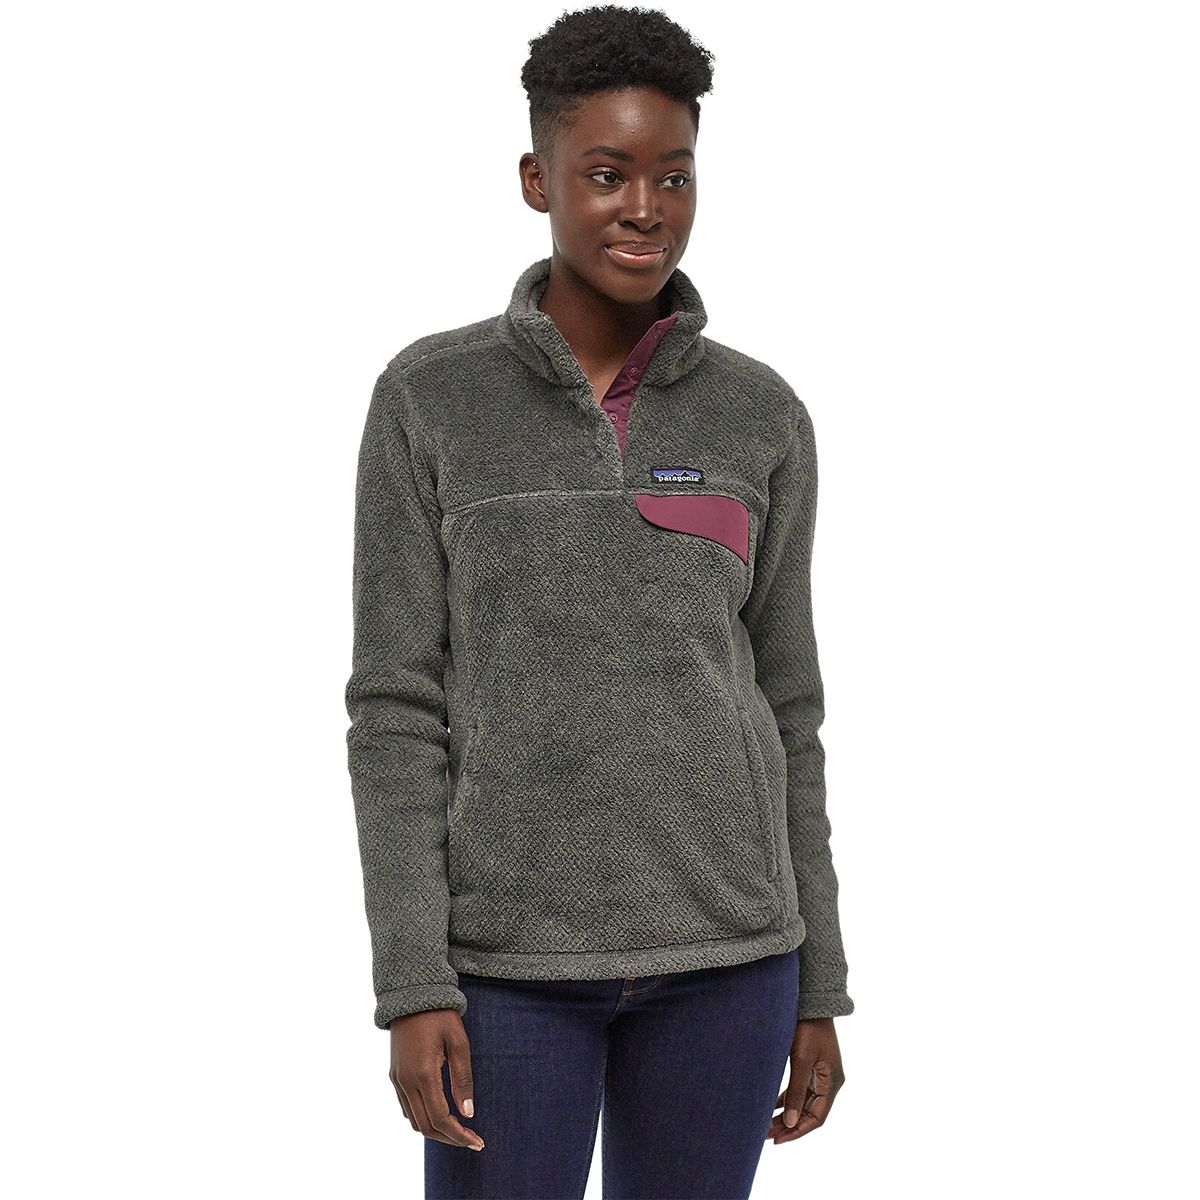 Patagonia Re-Tool Snap-T Fleece Pullover - Women's | Backcountry.com